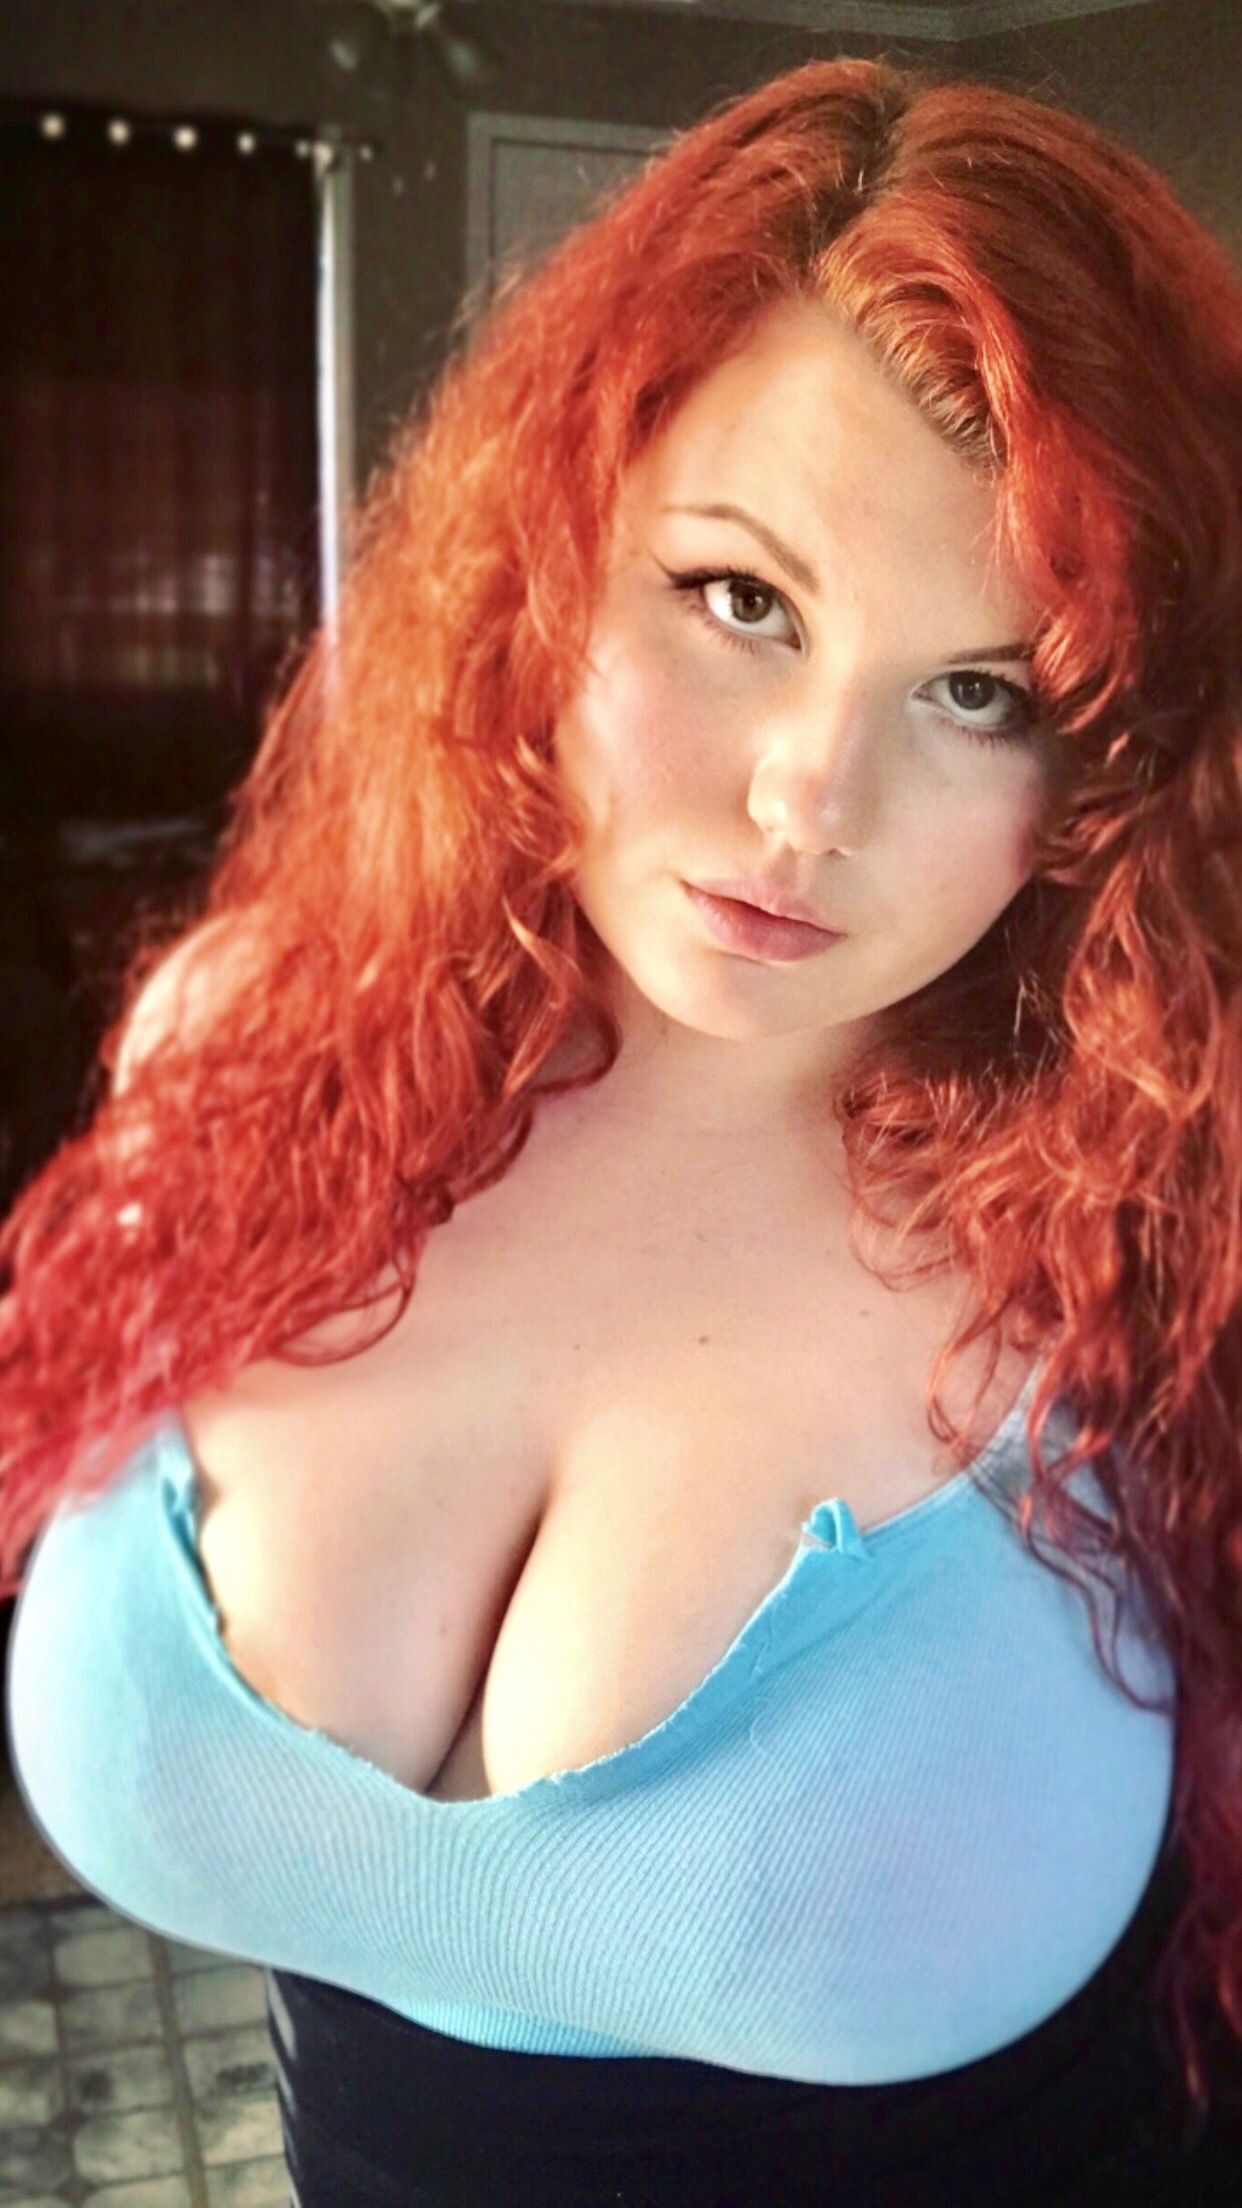 Very young redhead girls boobs